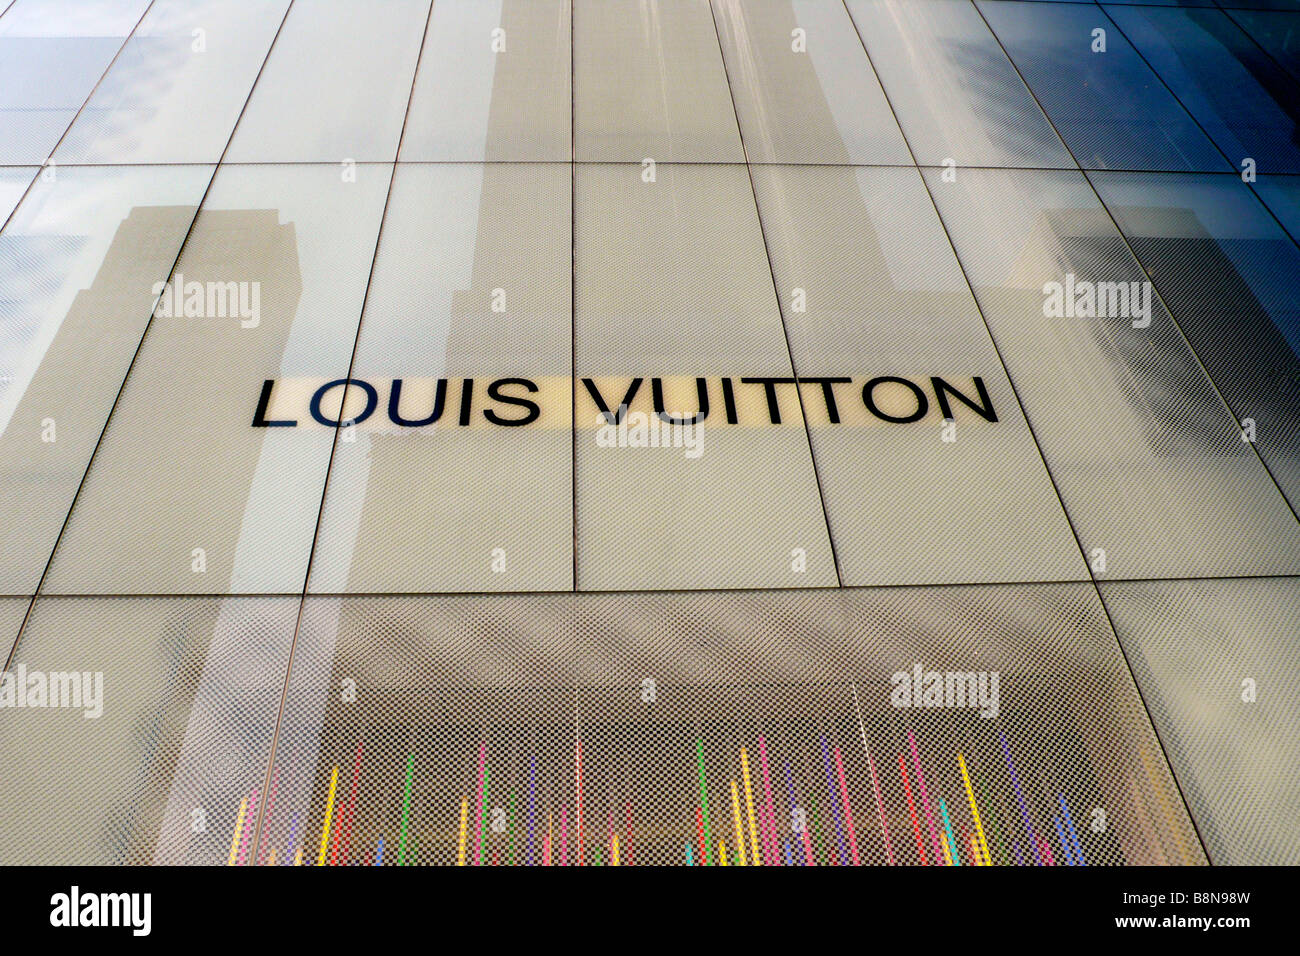 Louis Vuitton fashion store, Cologne, Germany Europe Stock Photo - Alamy